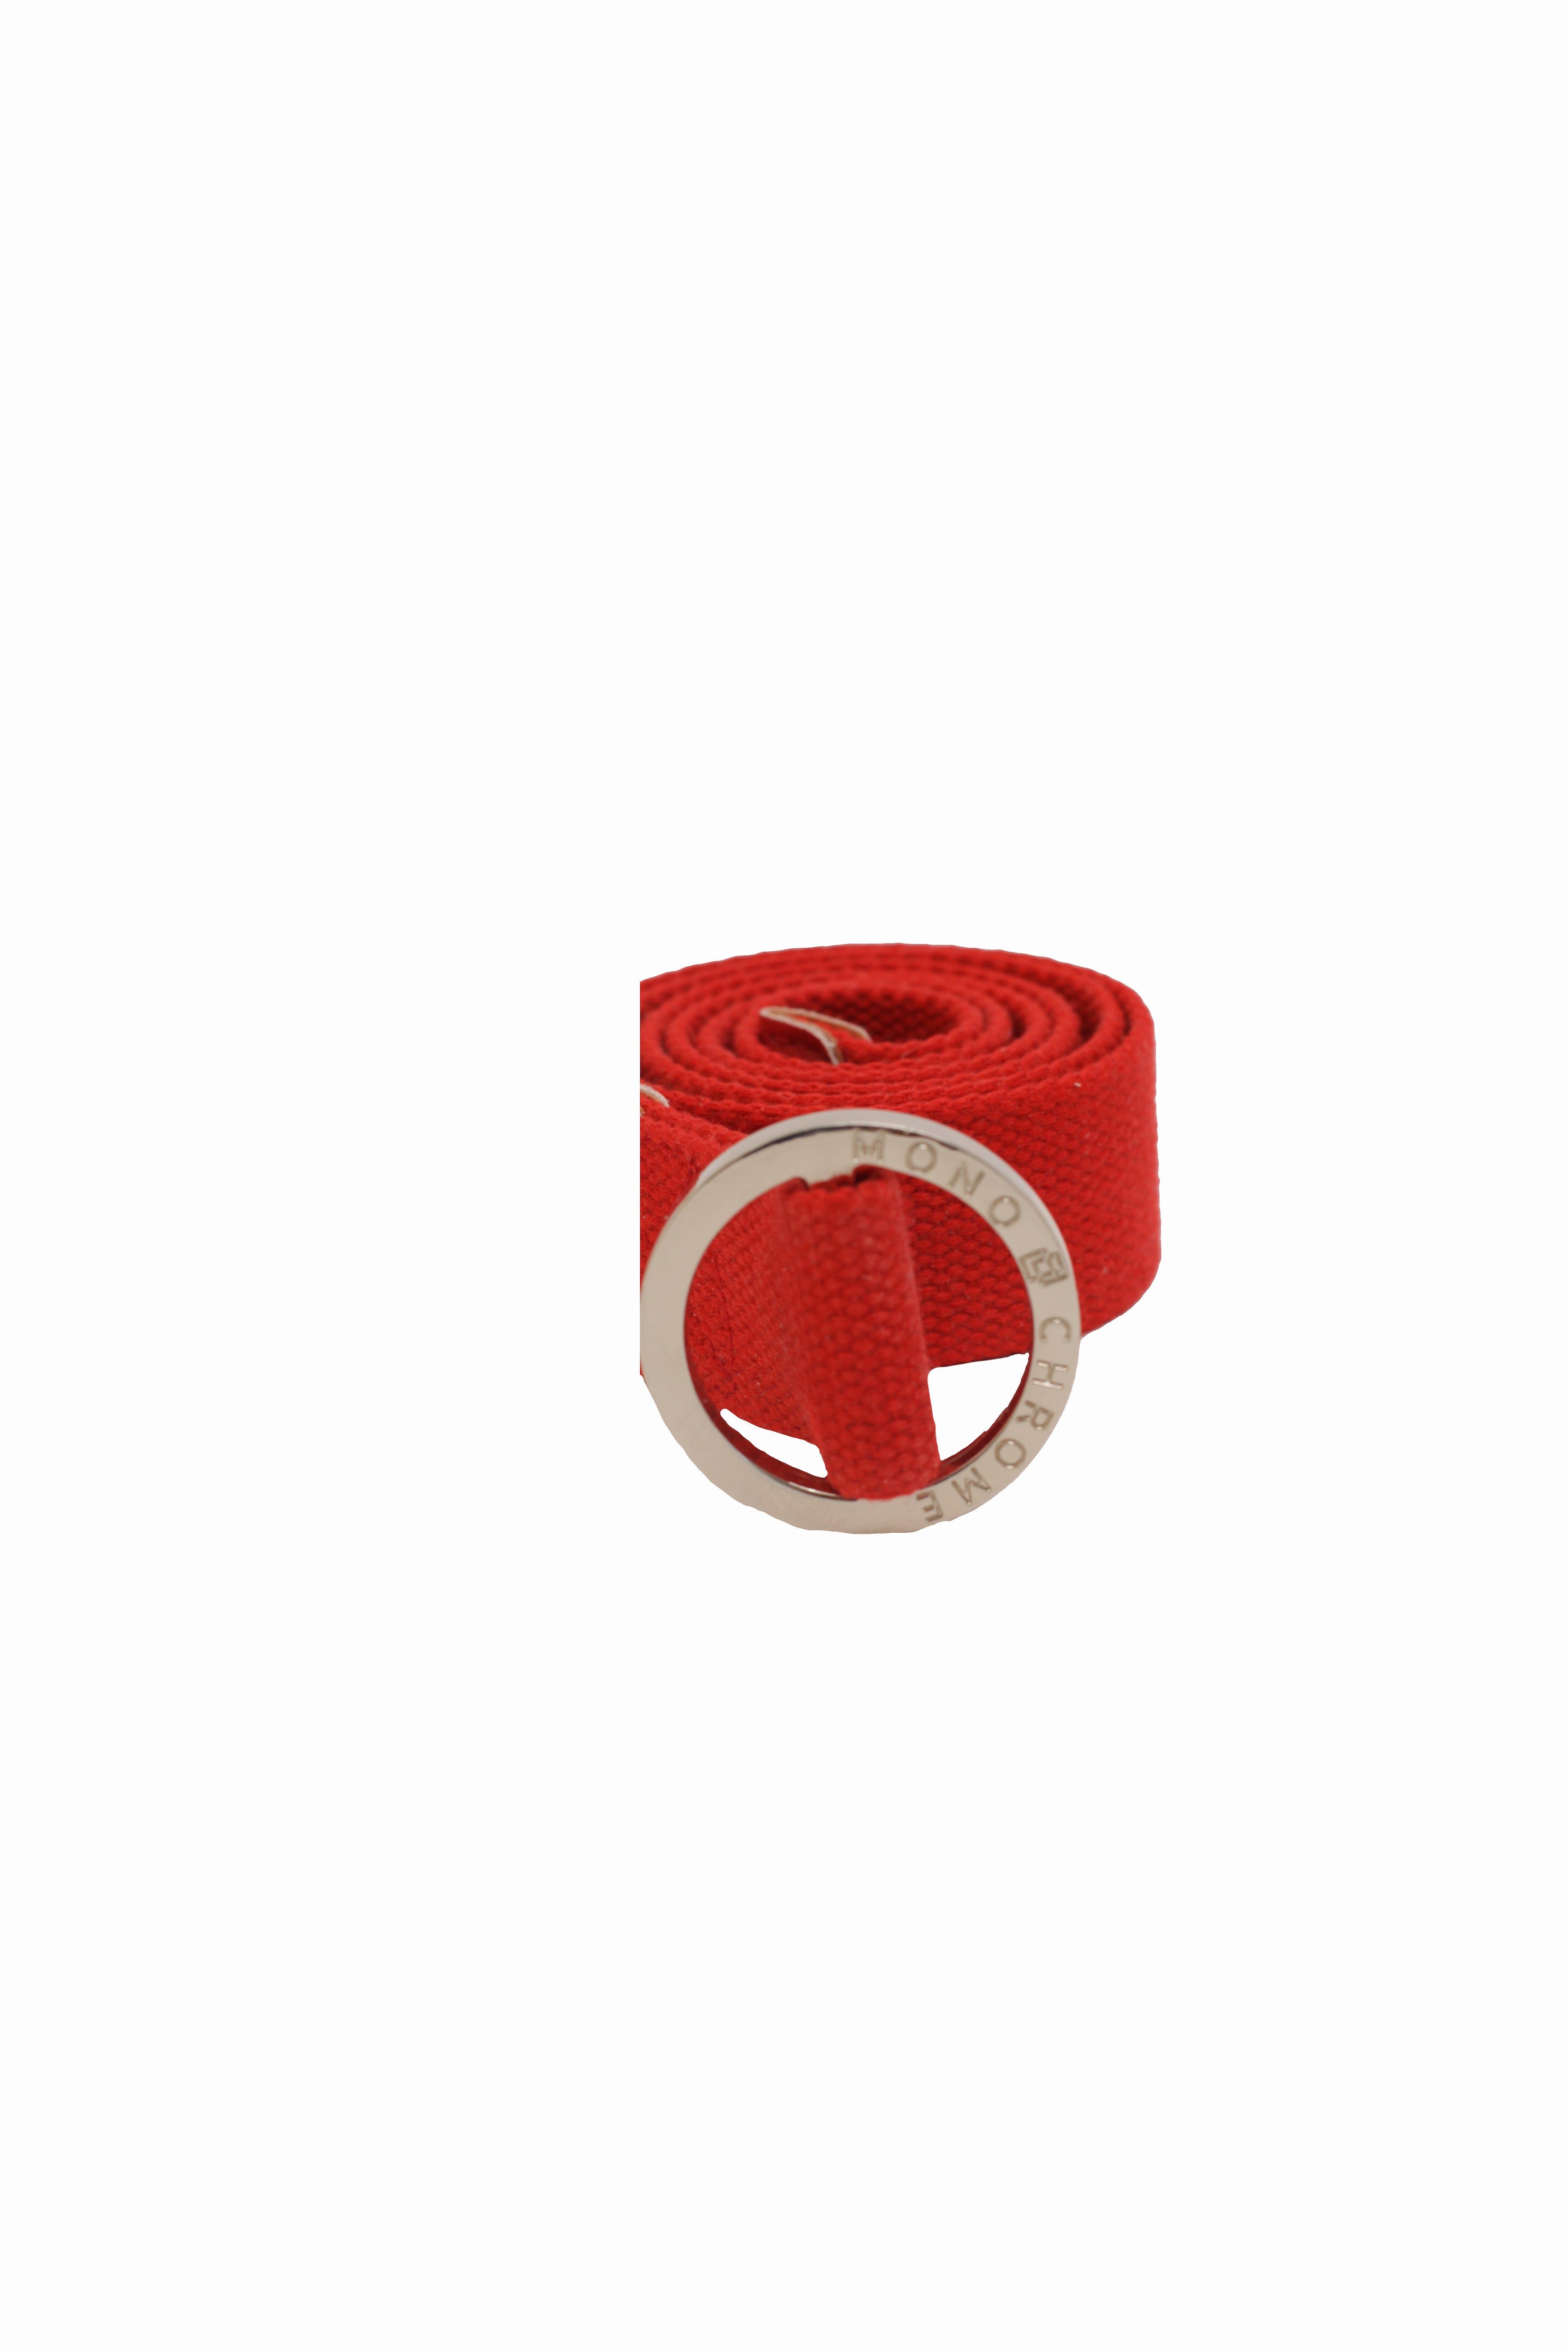 Monochrome offers stylish, elevated products in the six core colors. The Red Belt is simply that: red. Features red woven fabric with a stainless steel circle buckle. Bright red buckle for those wanting a plain and stylish buckle. Perfect for an upscale urban look with everyday utility.